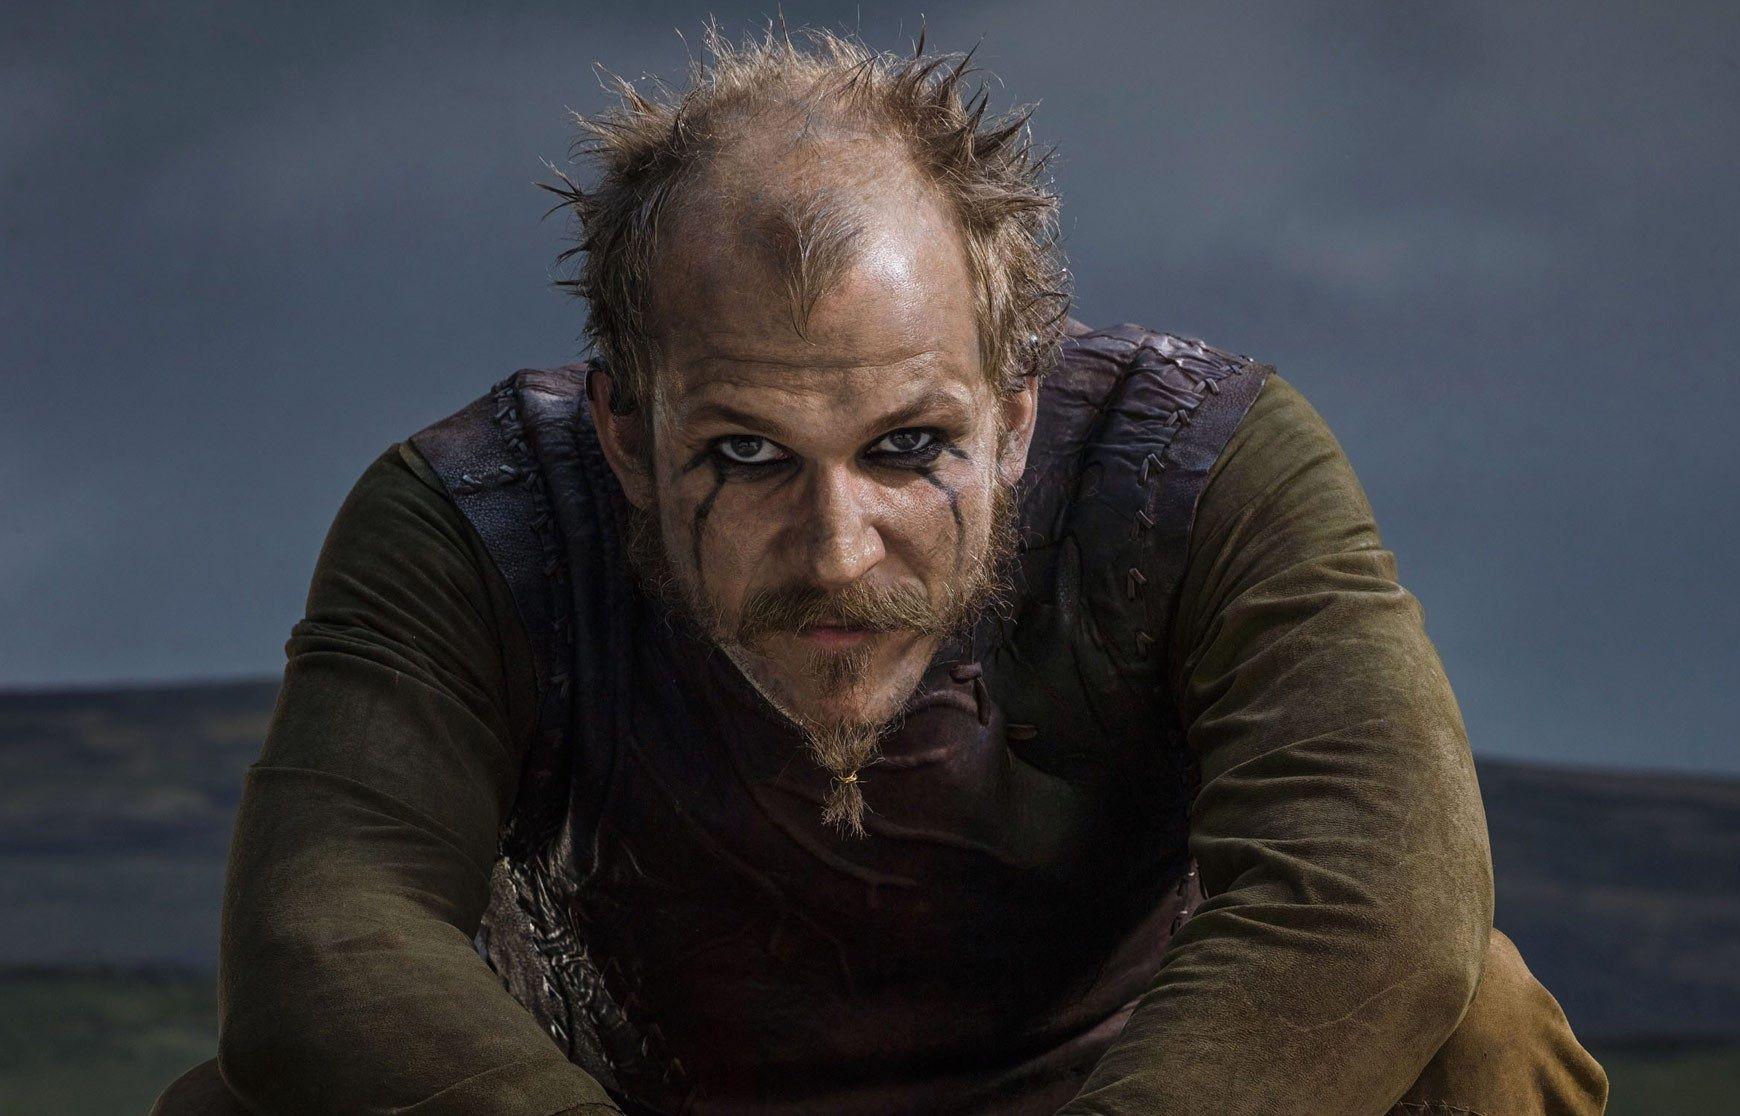 Read About Real Floki. Vikings. Best actor, Actor